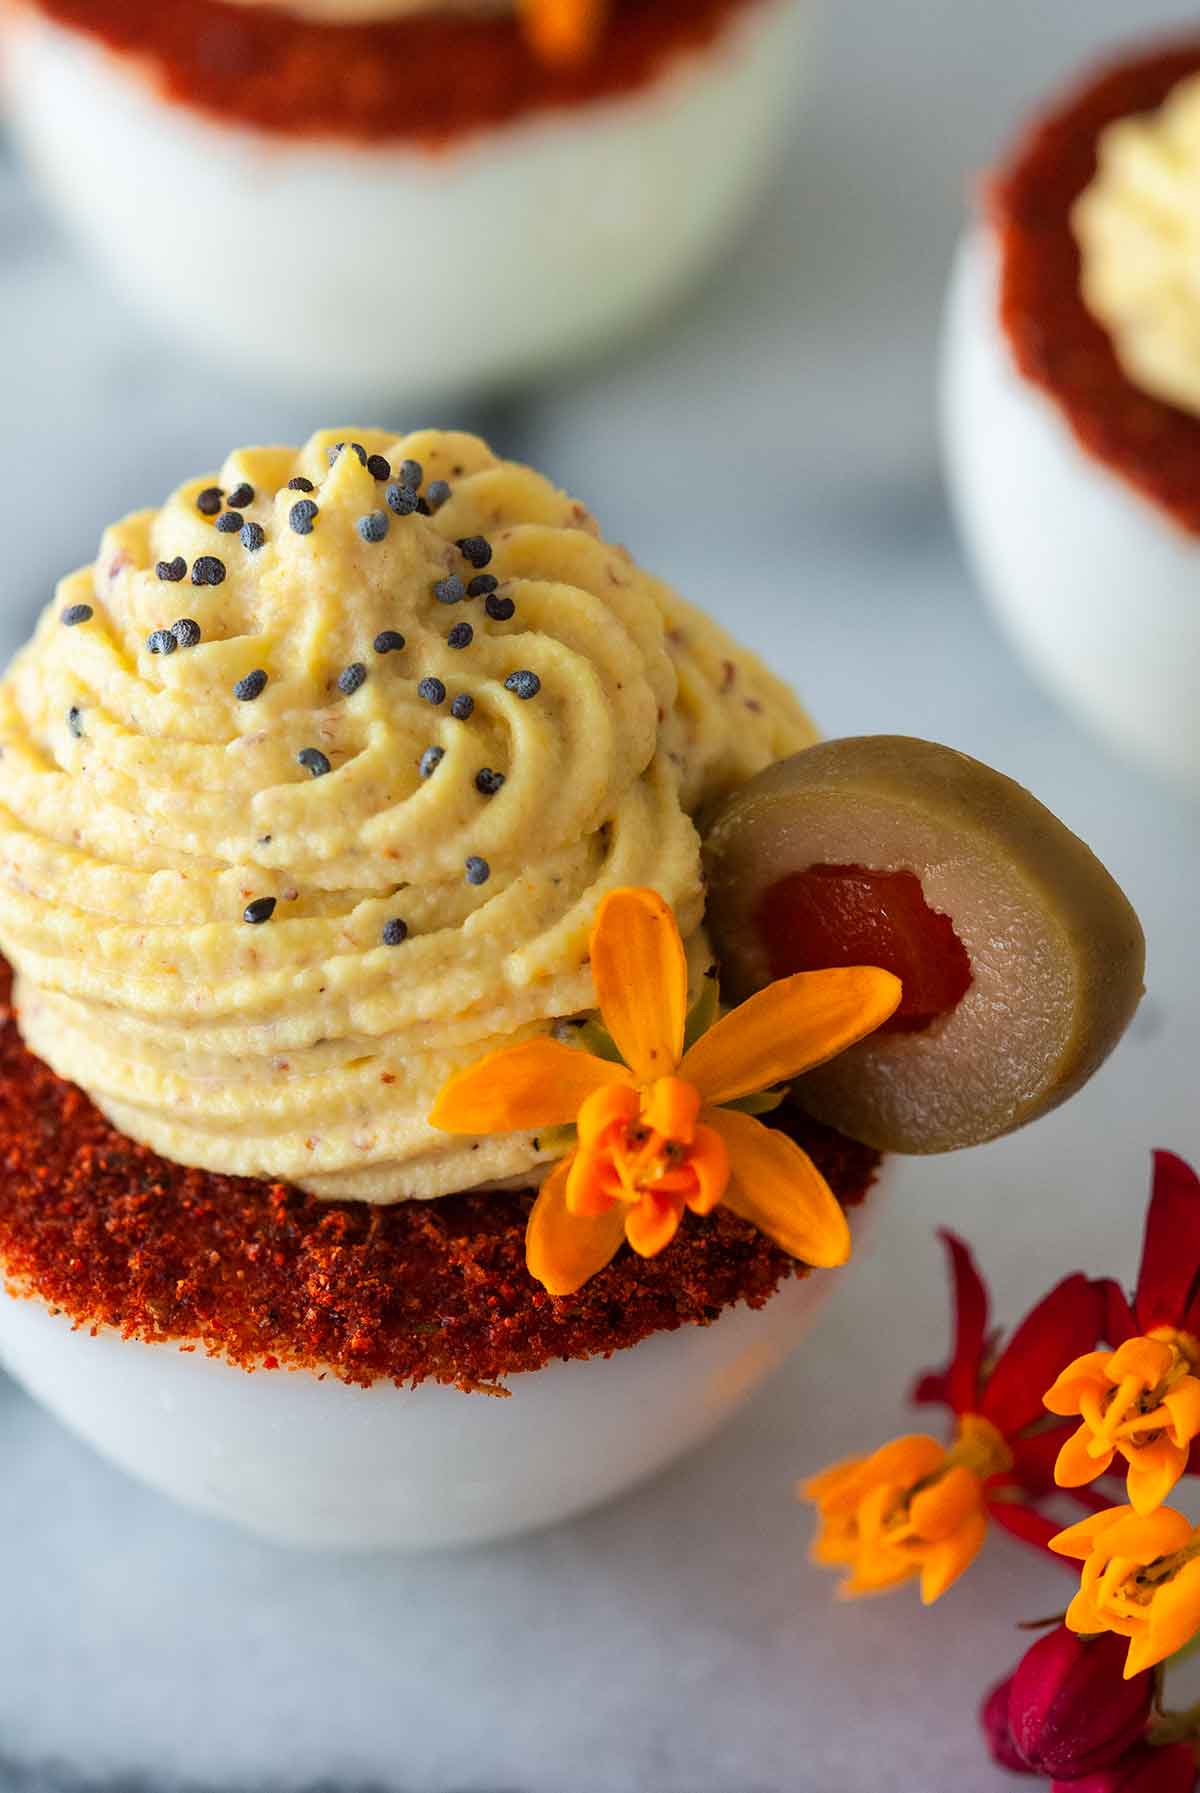 A deviled egg with a spiced rim on a marble plate, garnished with a flower and olive.